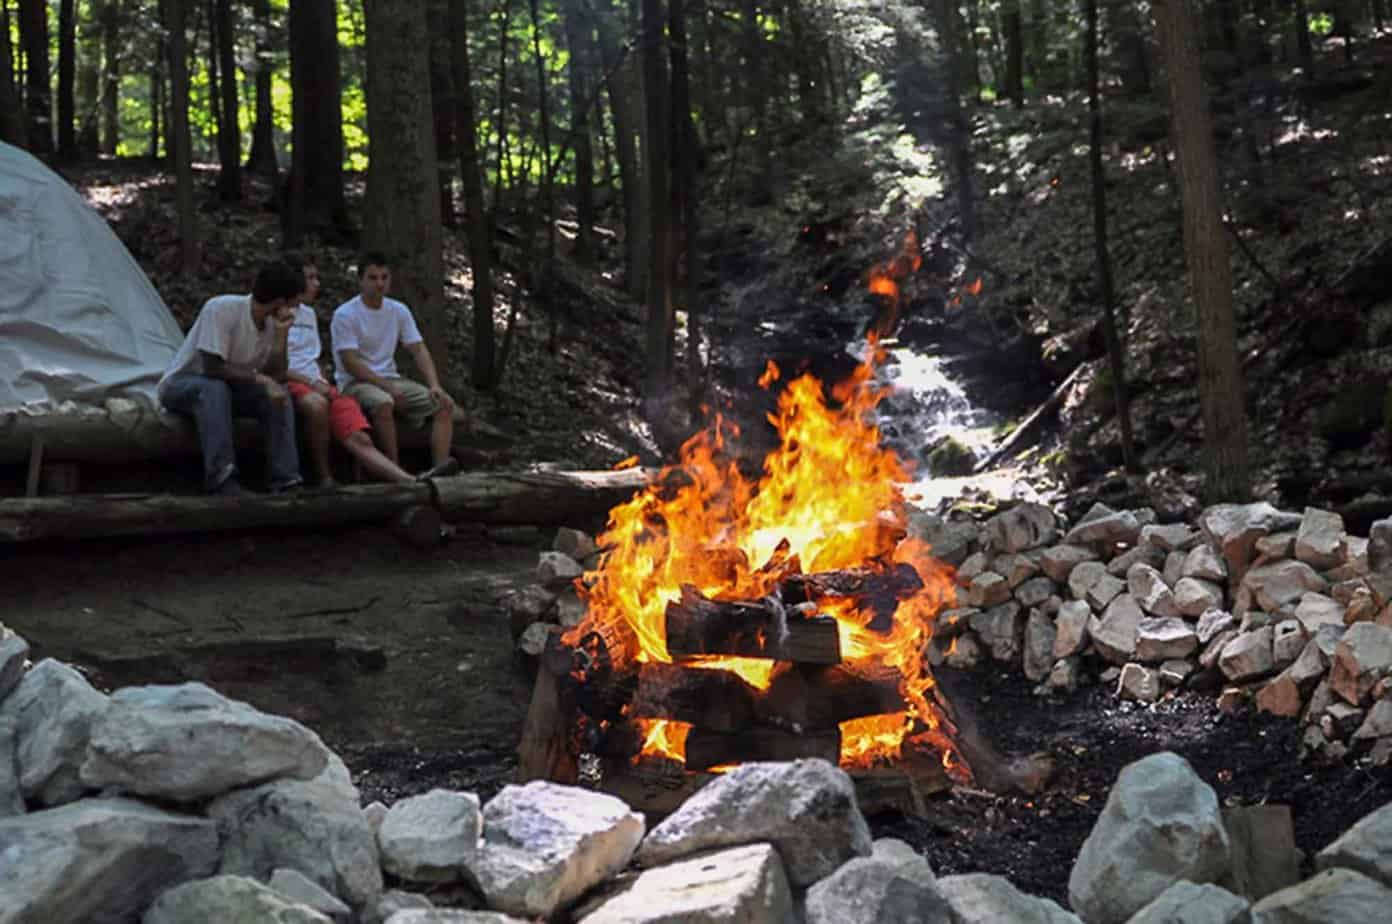 Wilderness therapy rehab program for young adults.